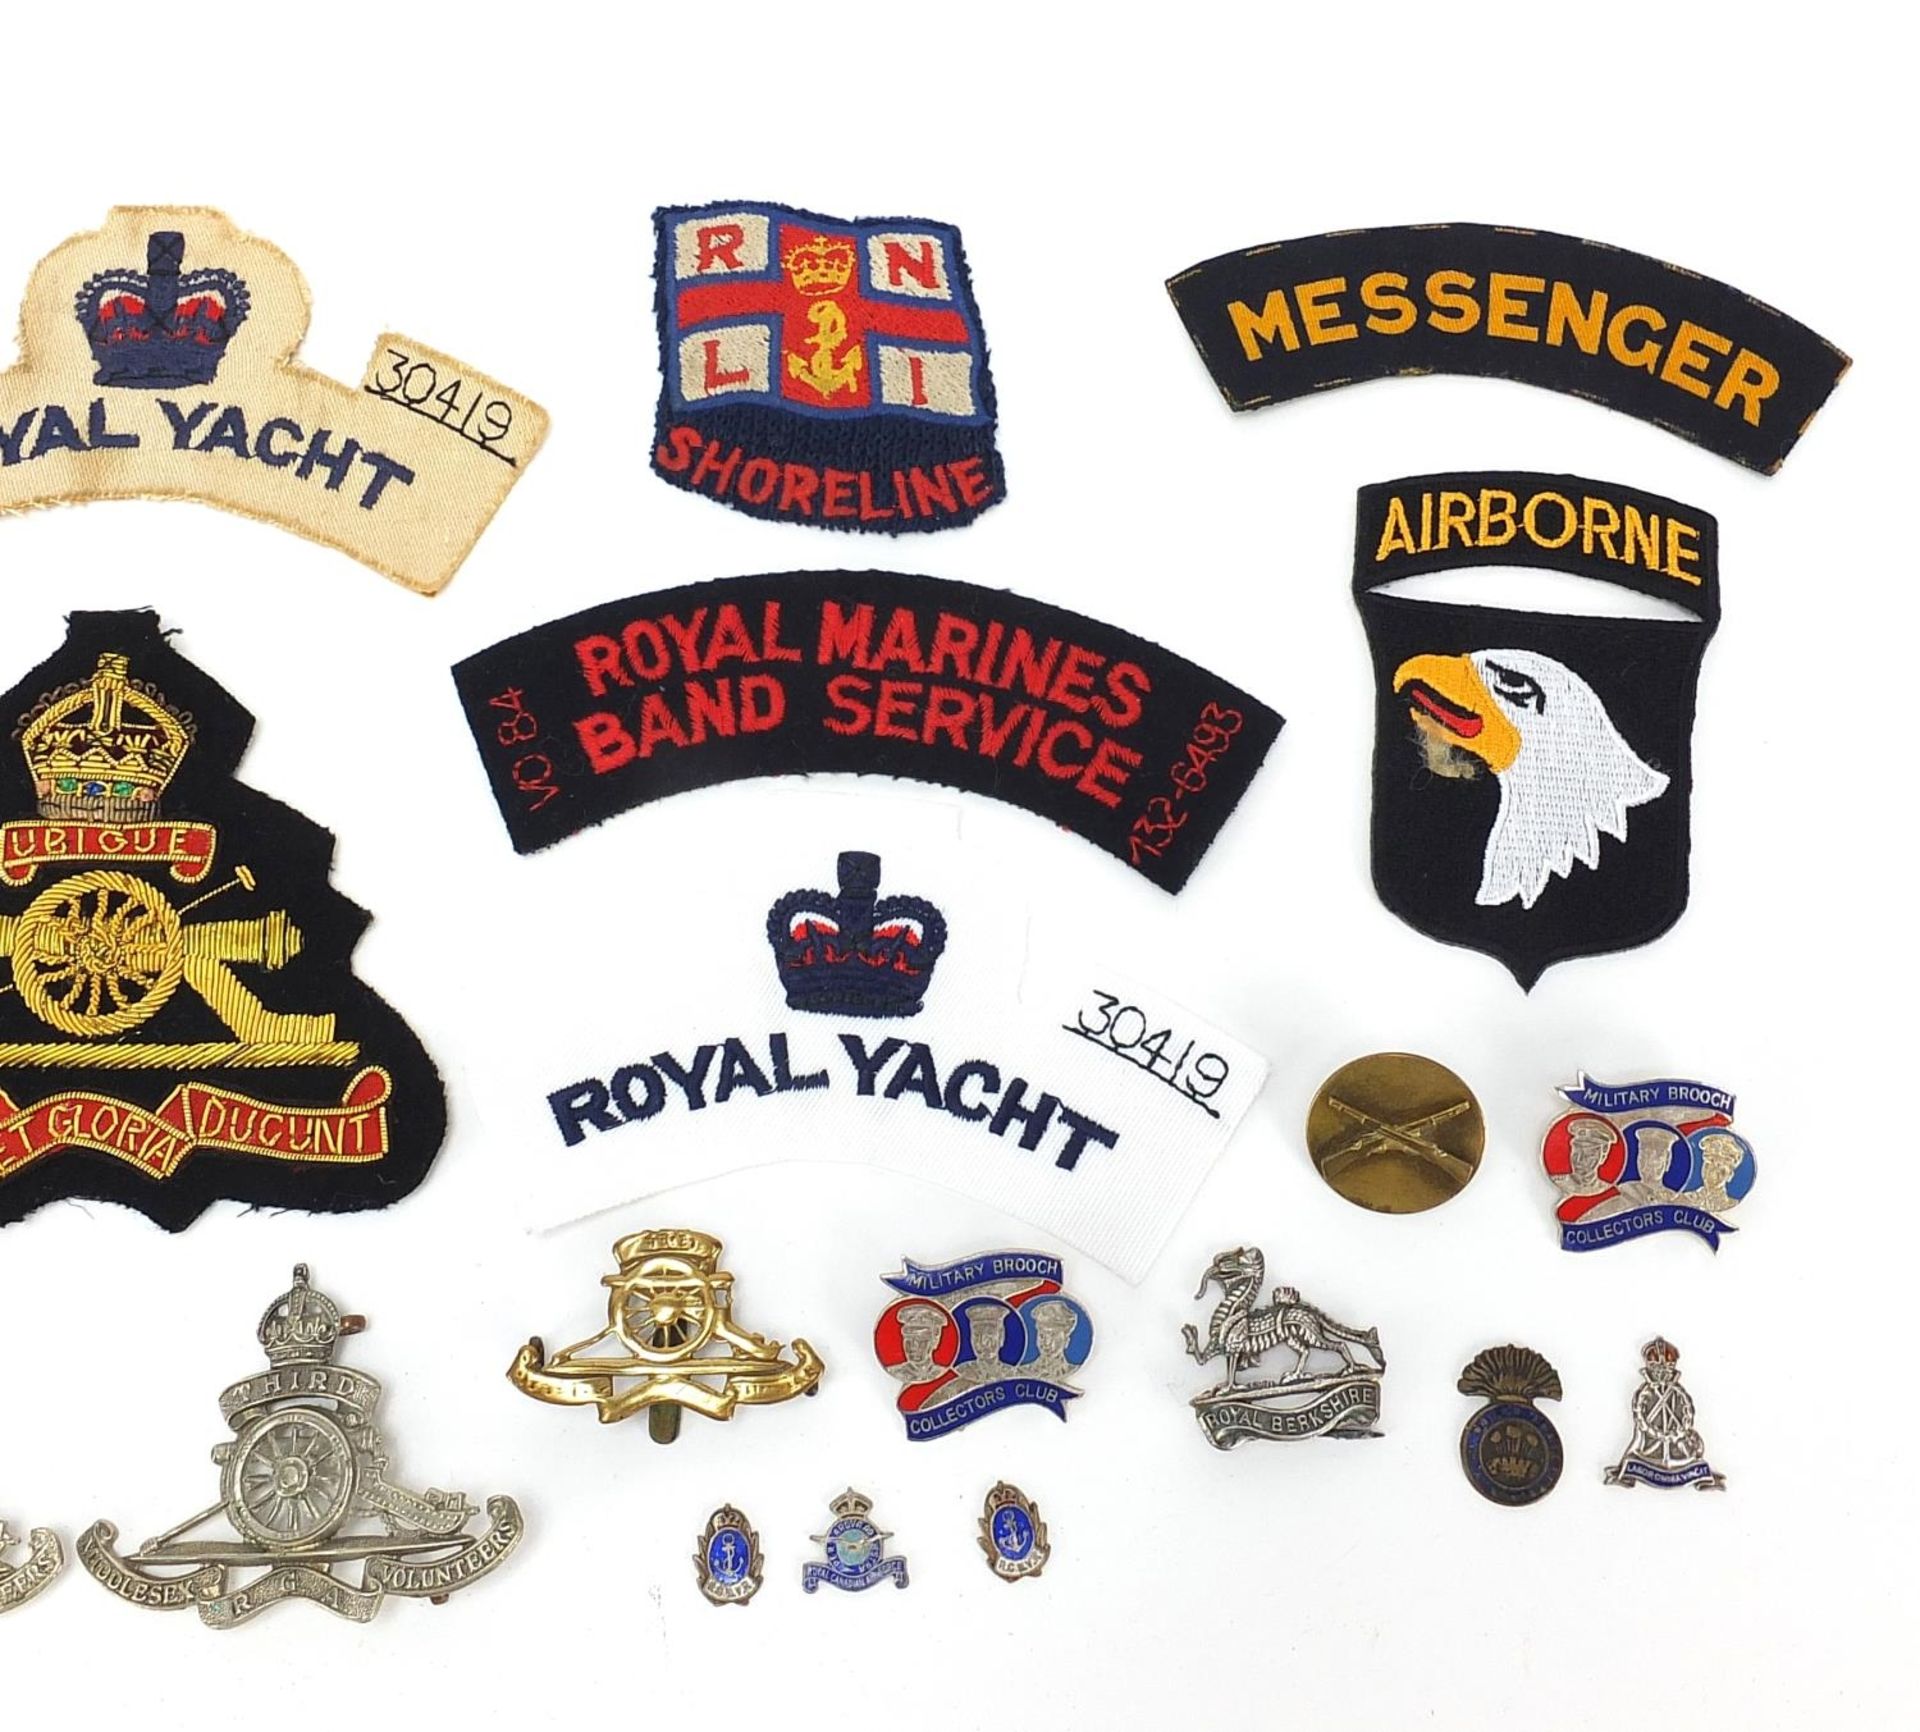 British military interest cloth patches and badges, some silver and enamel including Royal Artillery - Image 3 of 6